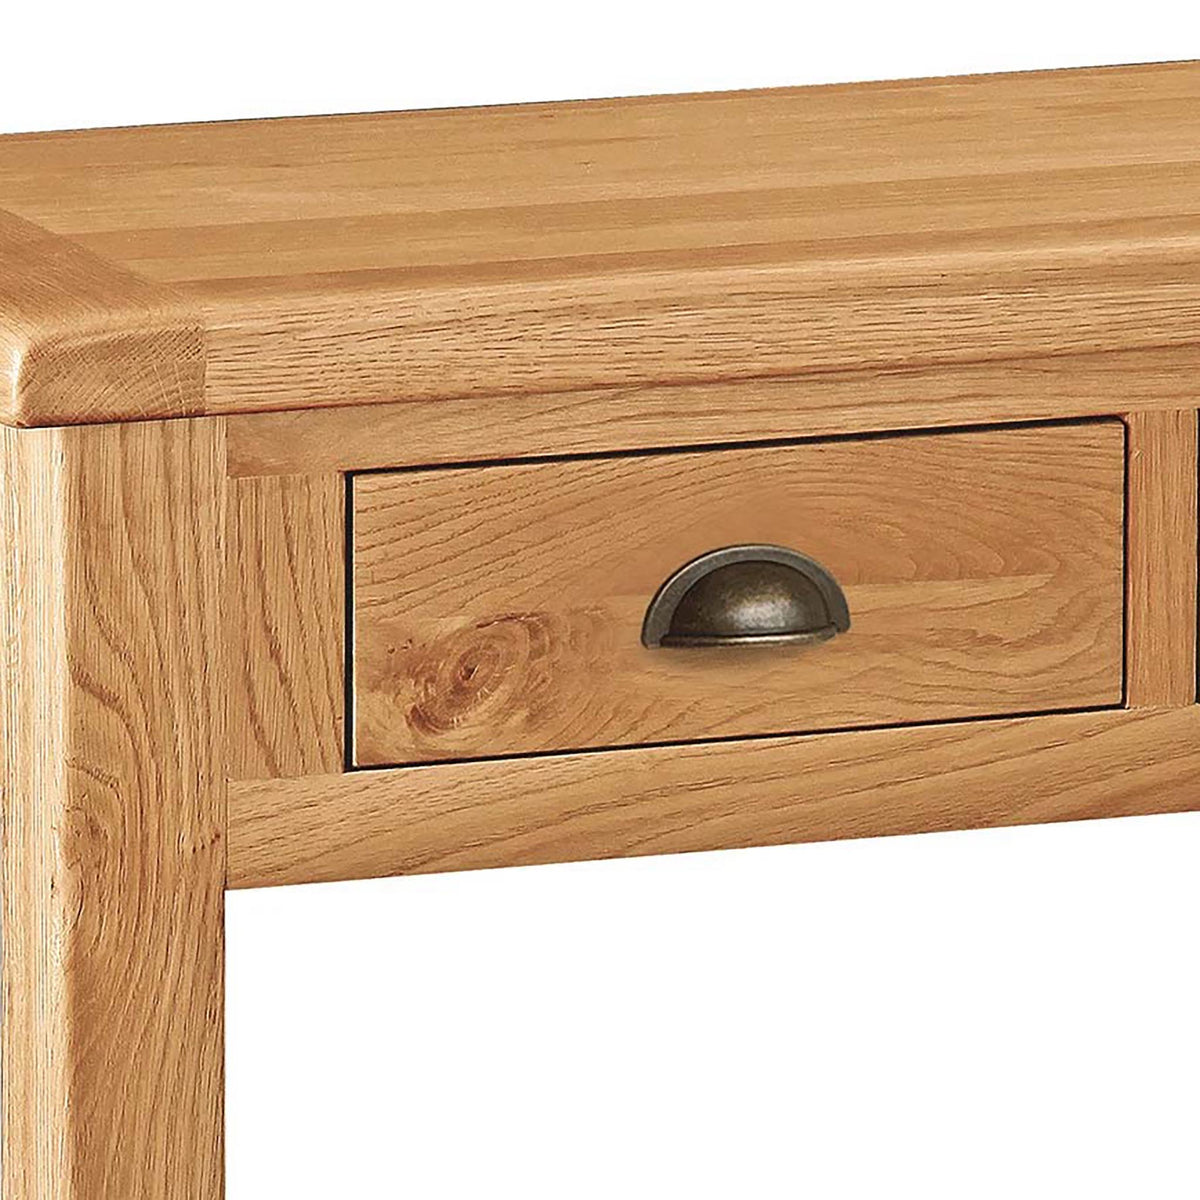 Sidmouth Oak Console Table - Close Up of Drawer